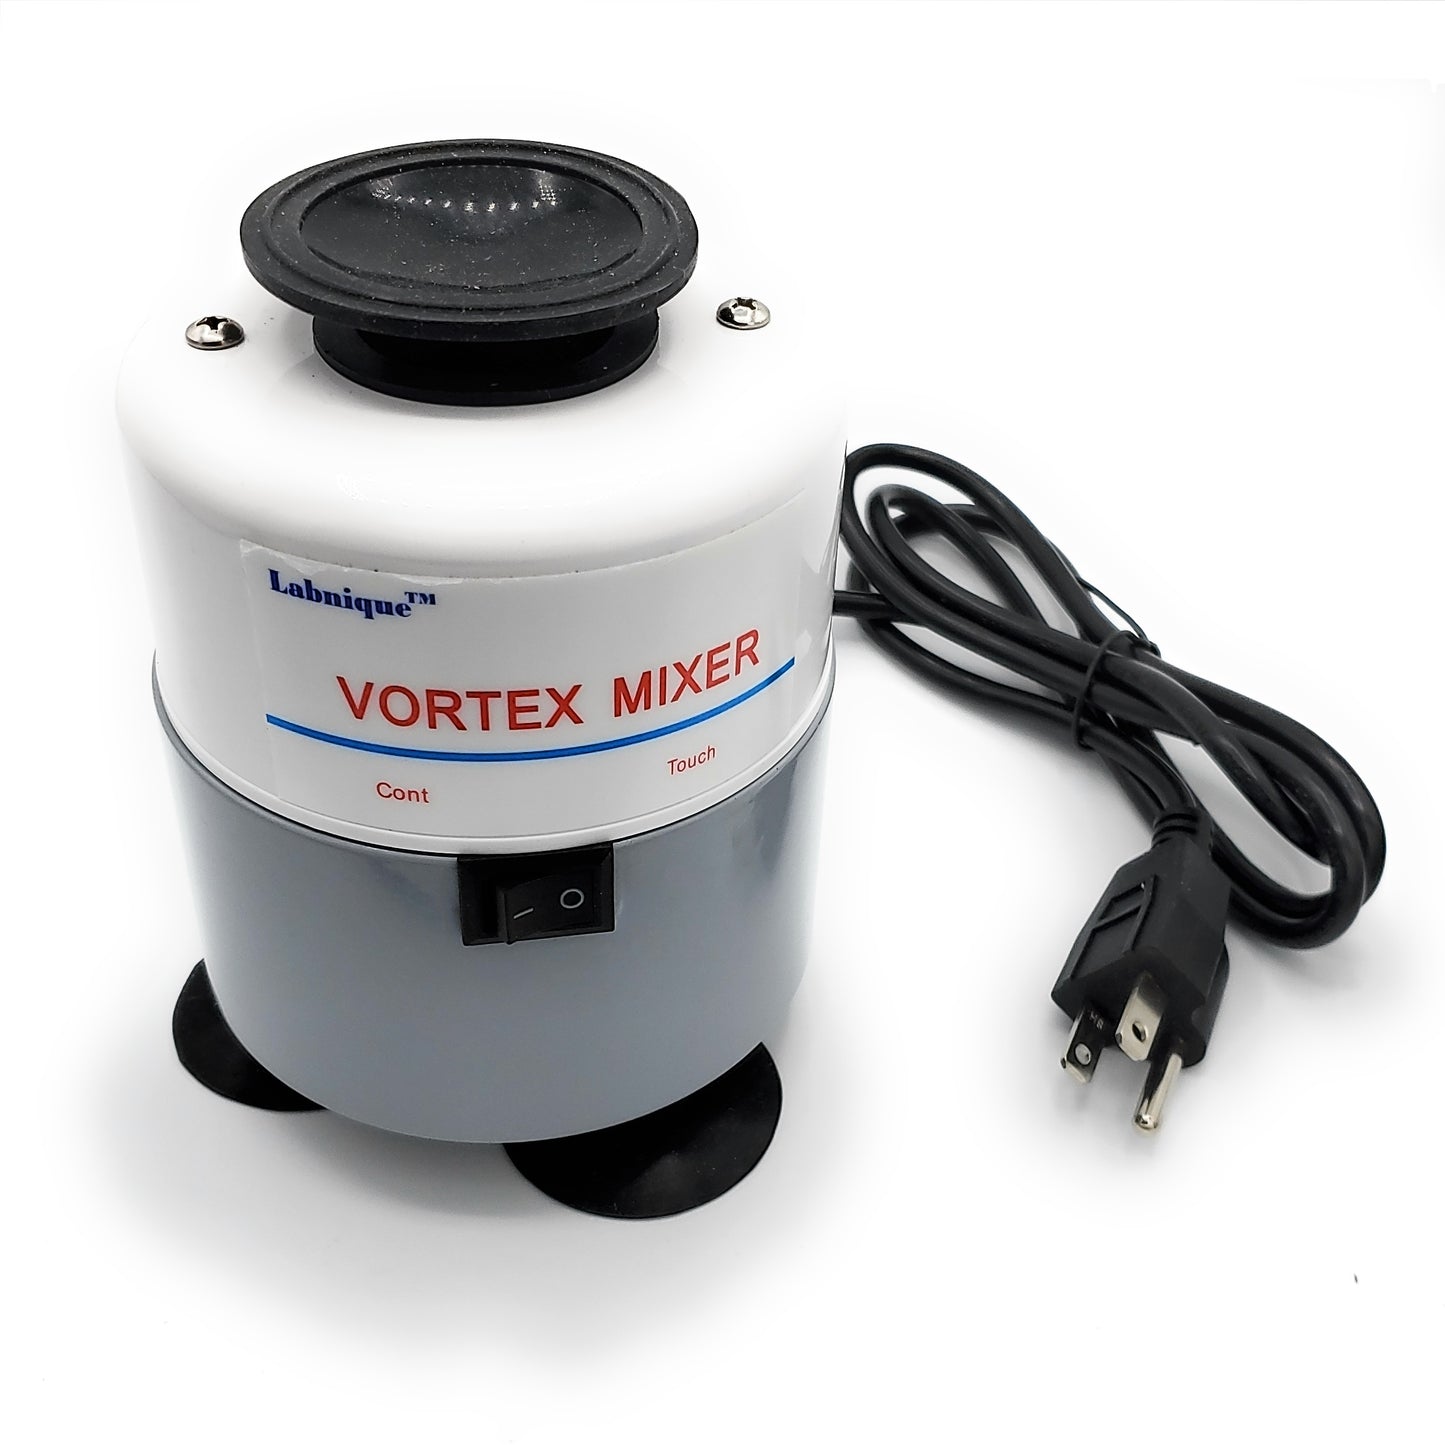 Vortex Mixer with Touch and Continuous Mode, 110V